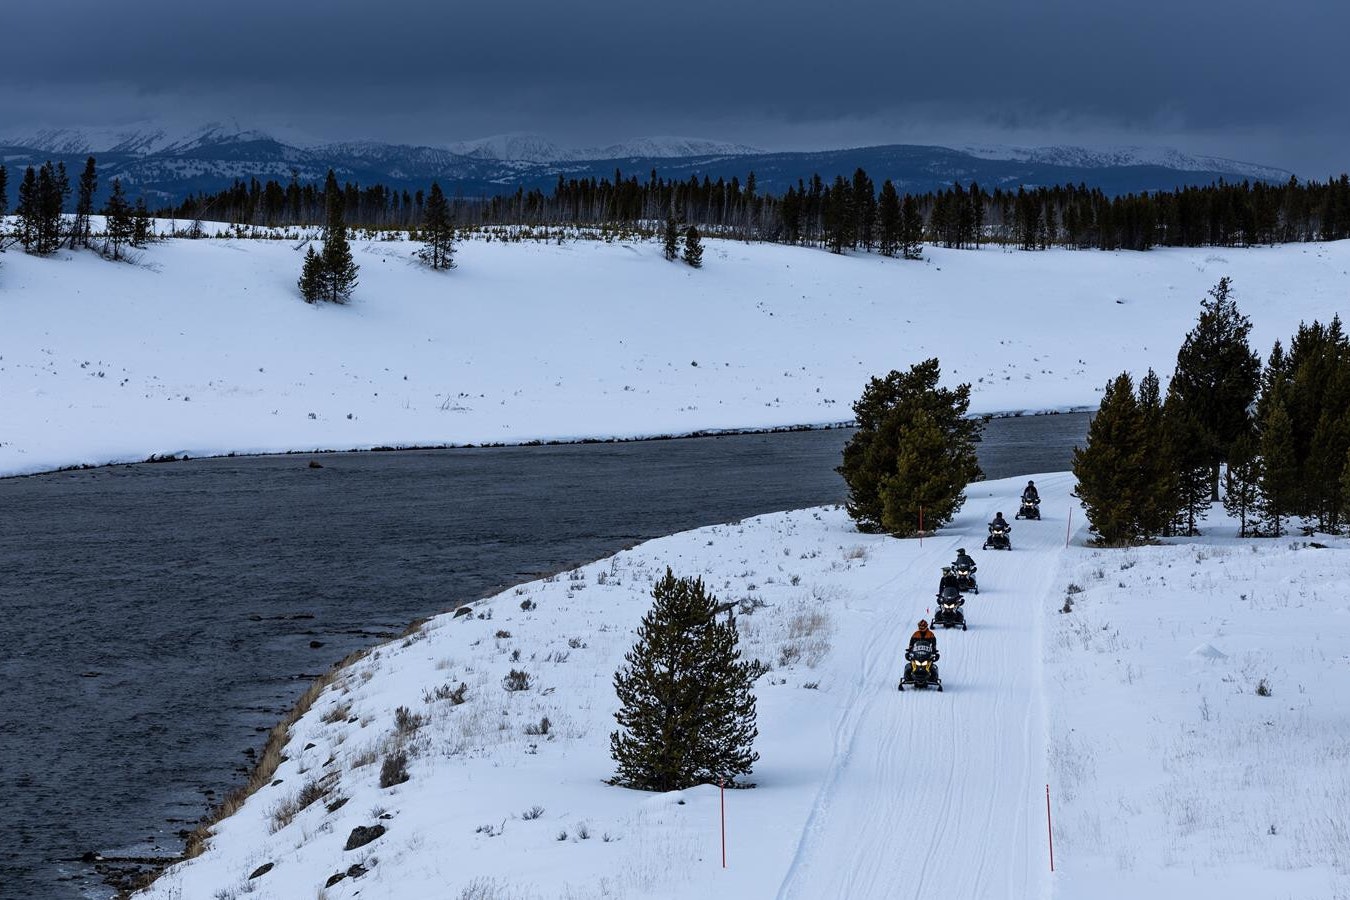 Seeing Yellowstone from a snowmobile is akin to catching salmon from the river and cooking them over a campfire. But instead of tastes and smells, you’ll remember sights and feelings.